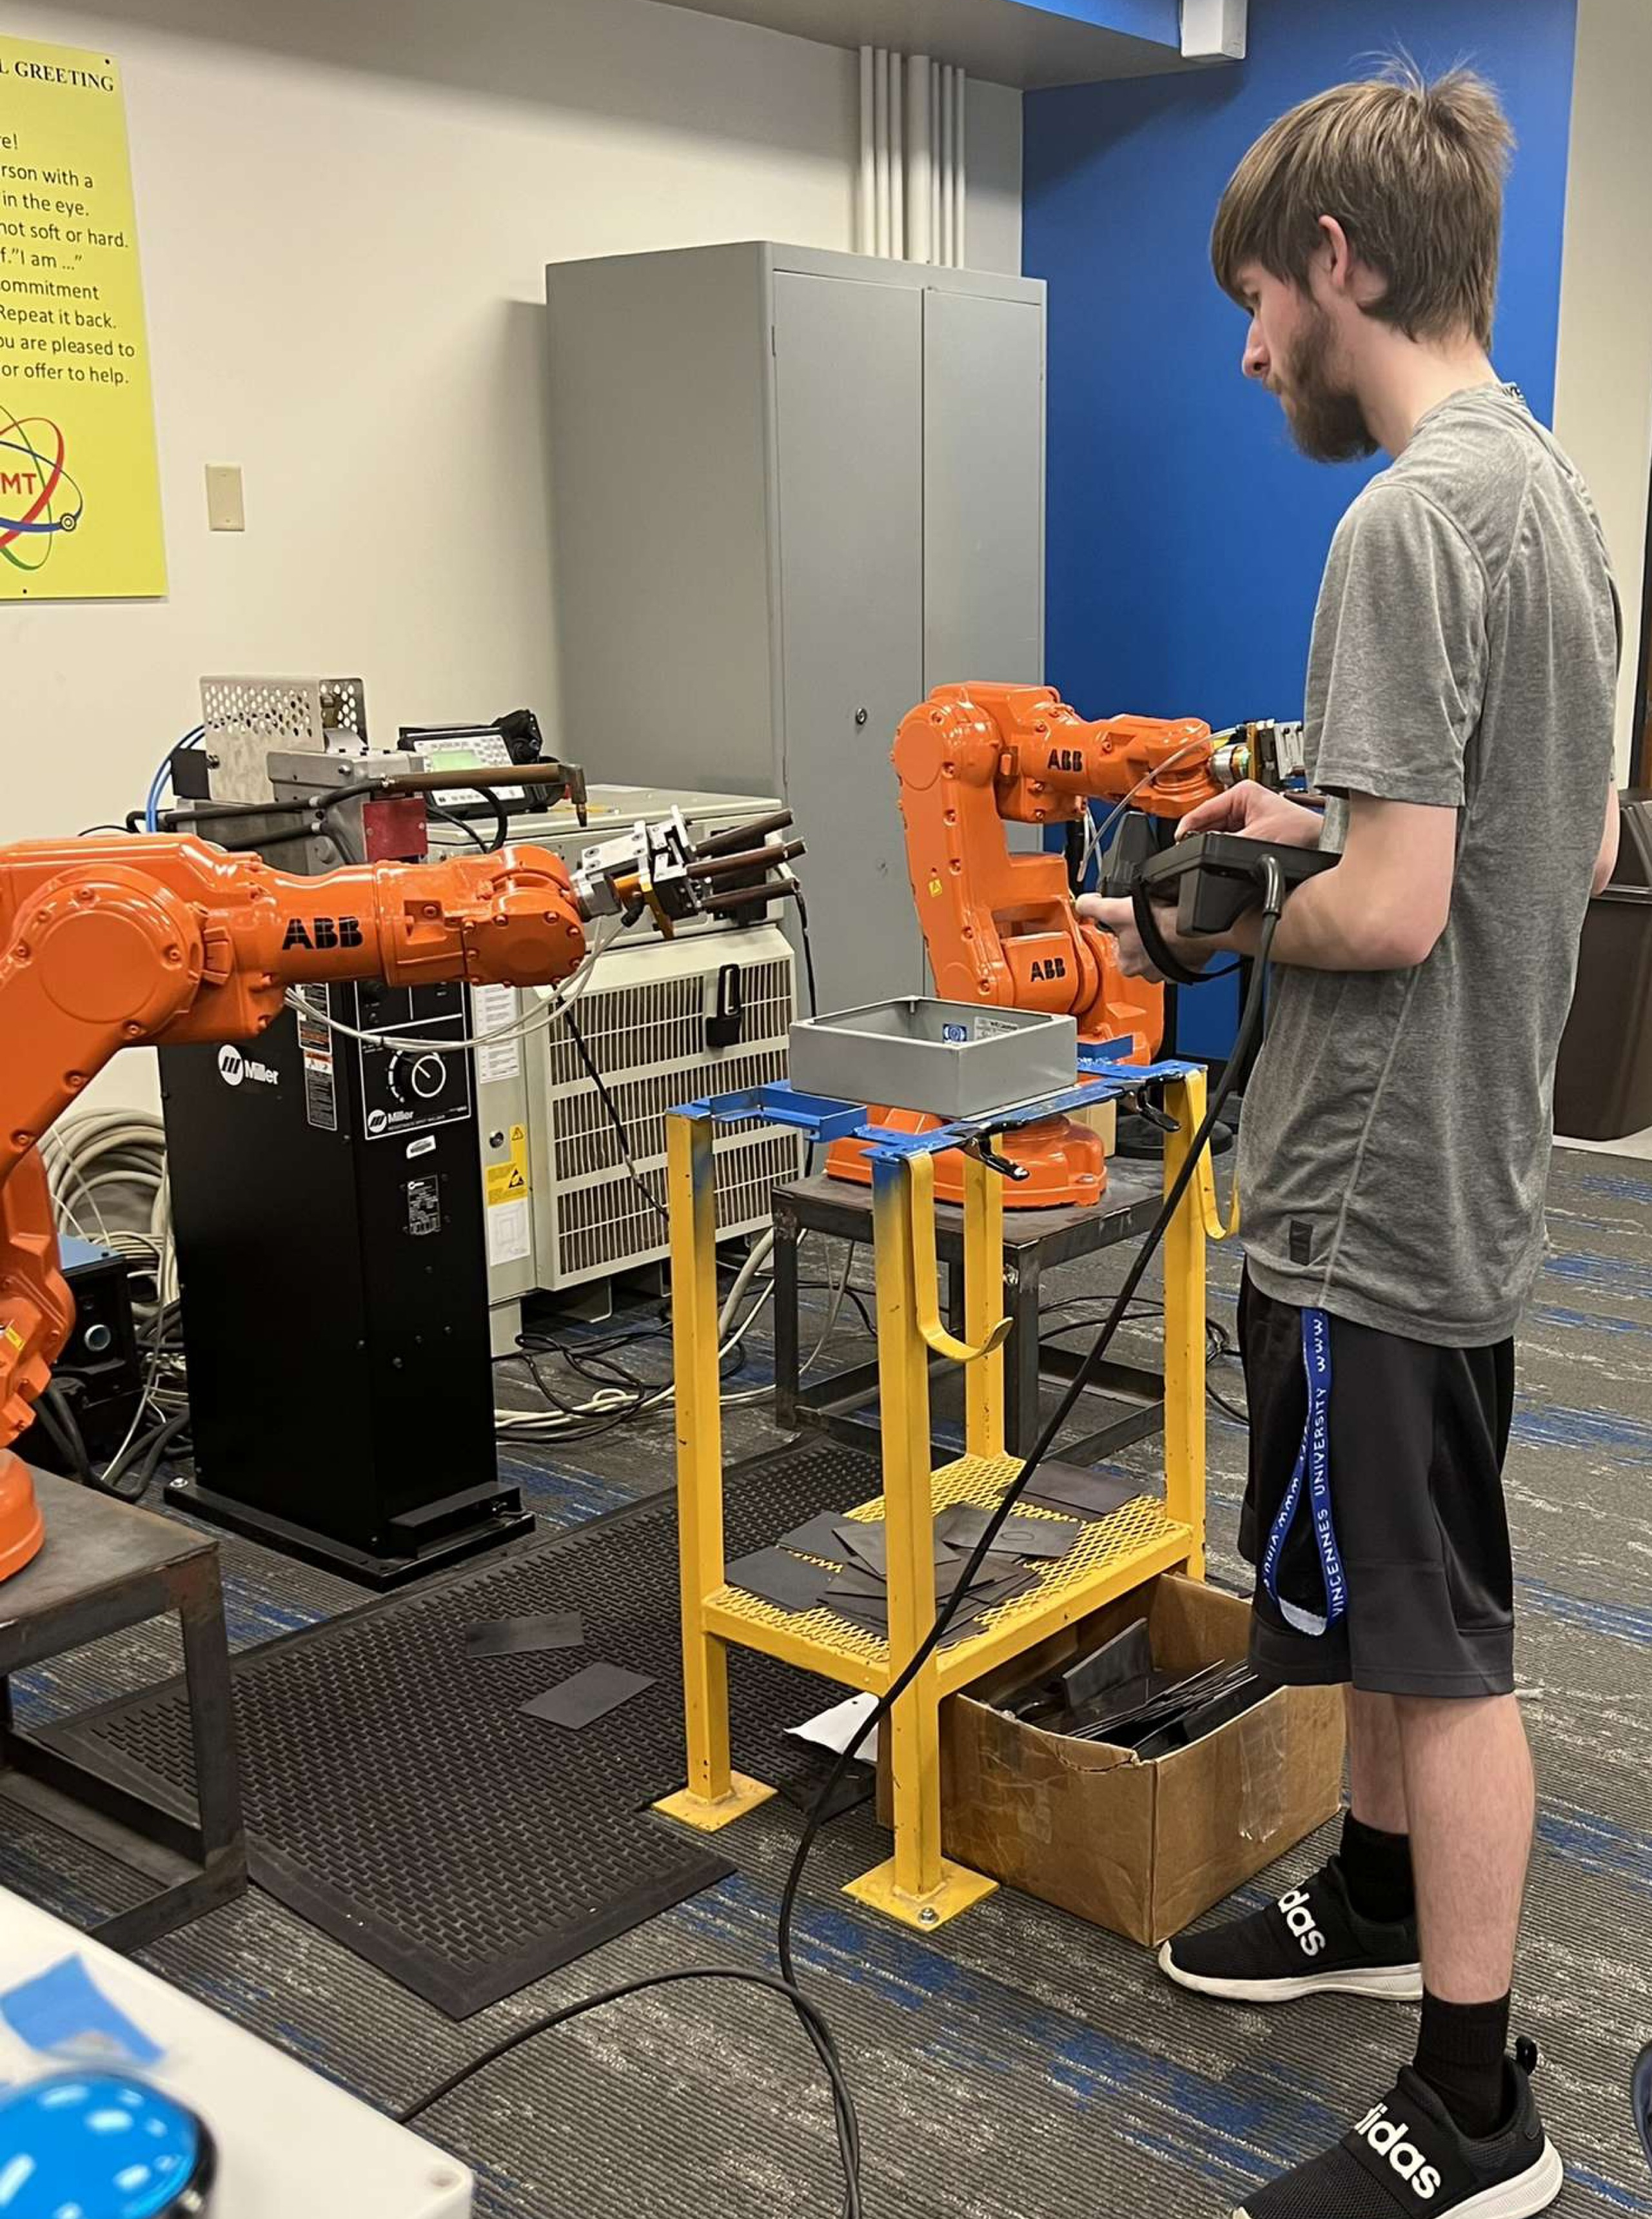 VU student Brock Wilson operates a robot in Technology Center on Vincennes Campus